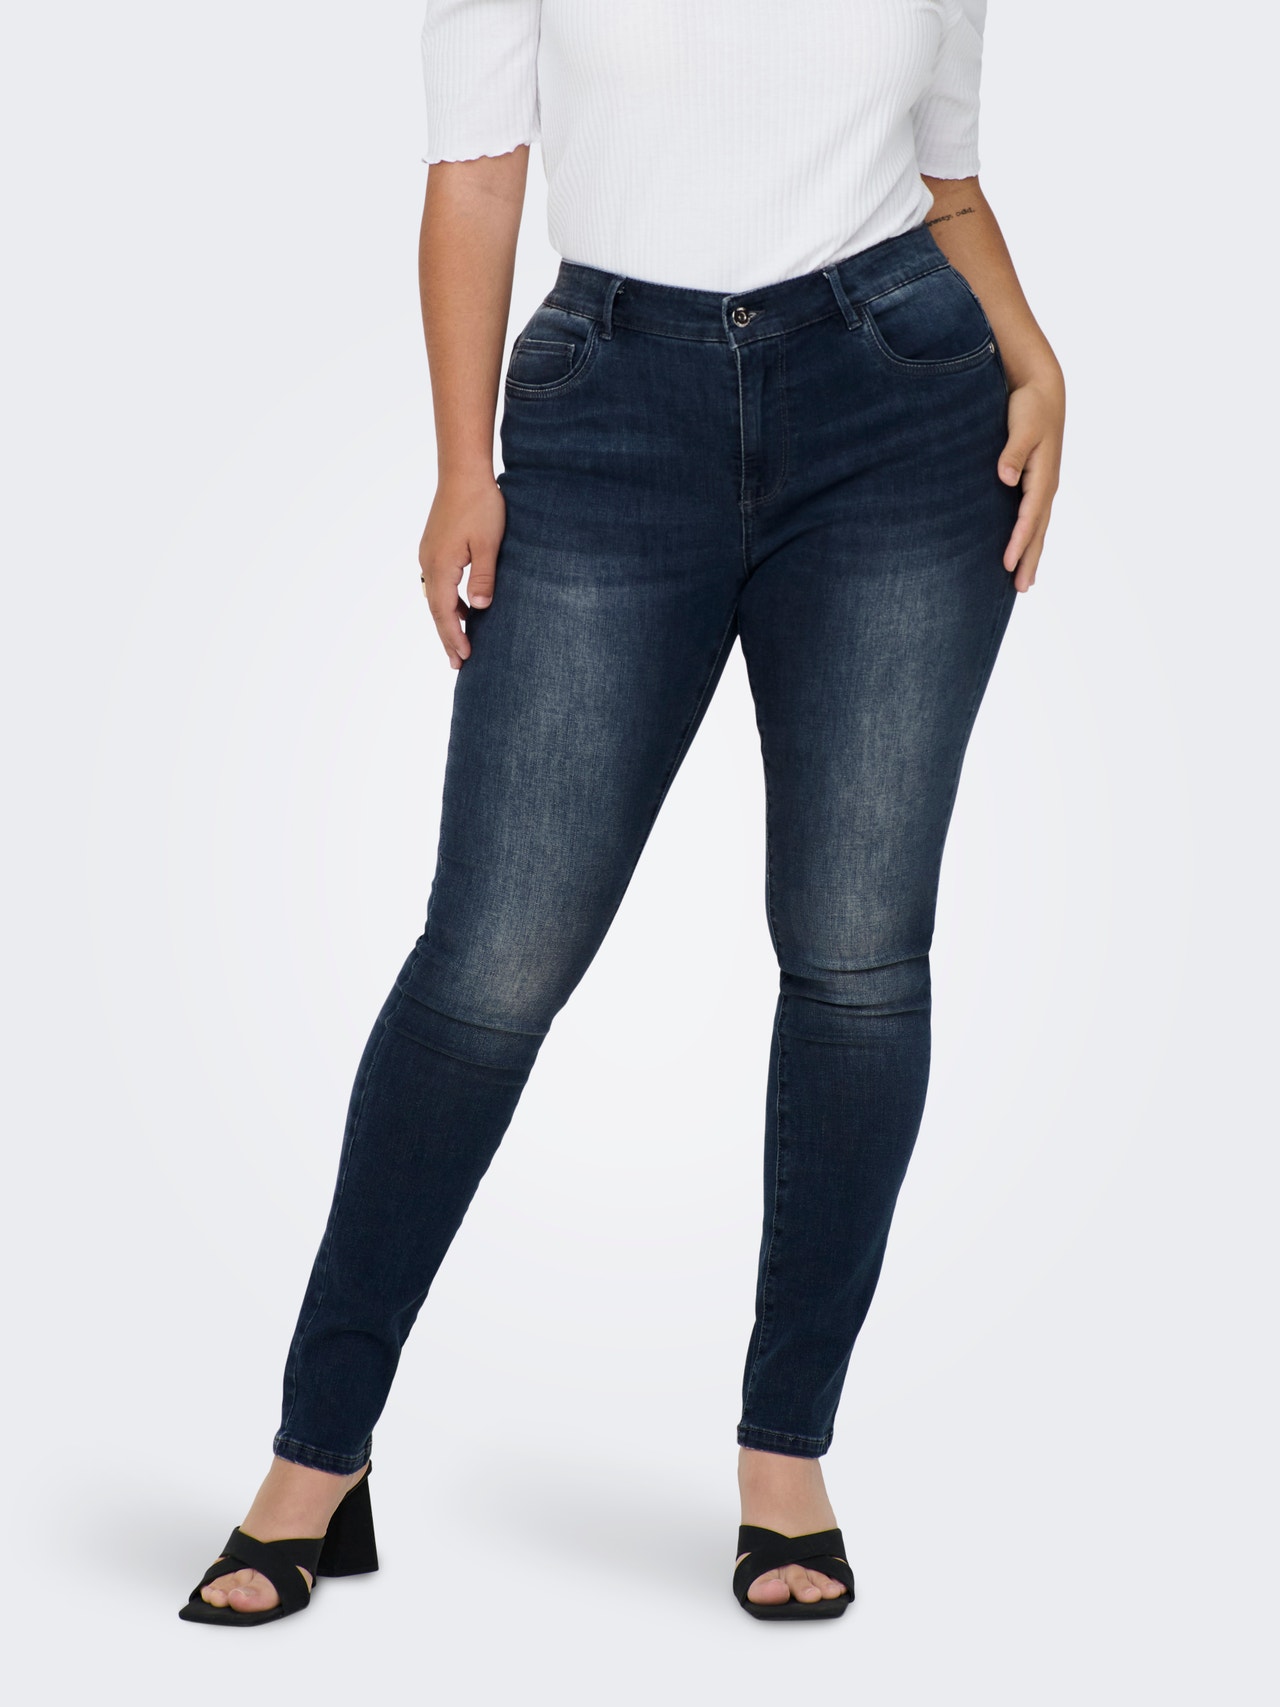 Curvy CARSally reg Skinny fit with 30% ONLY® jeans discount! 